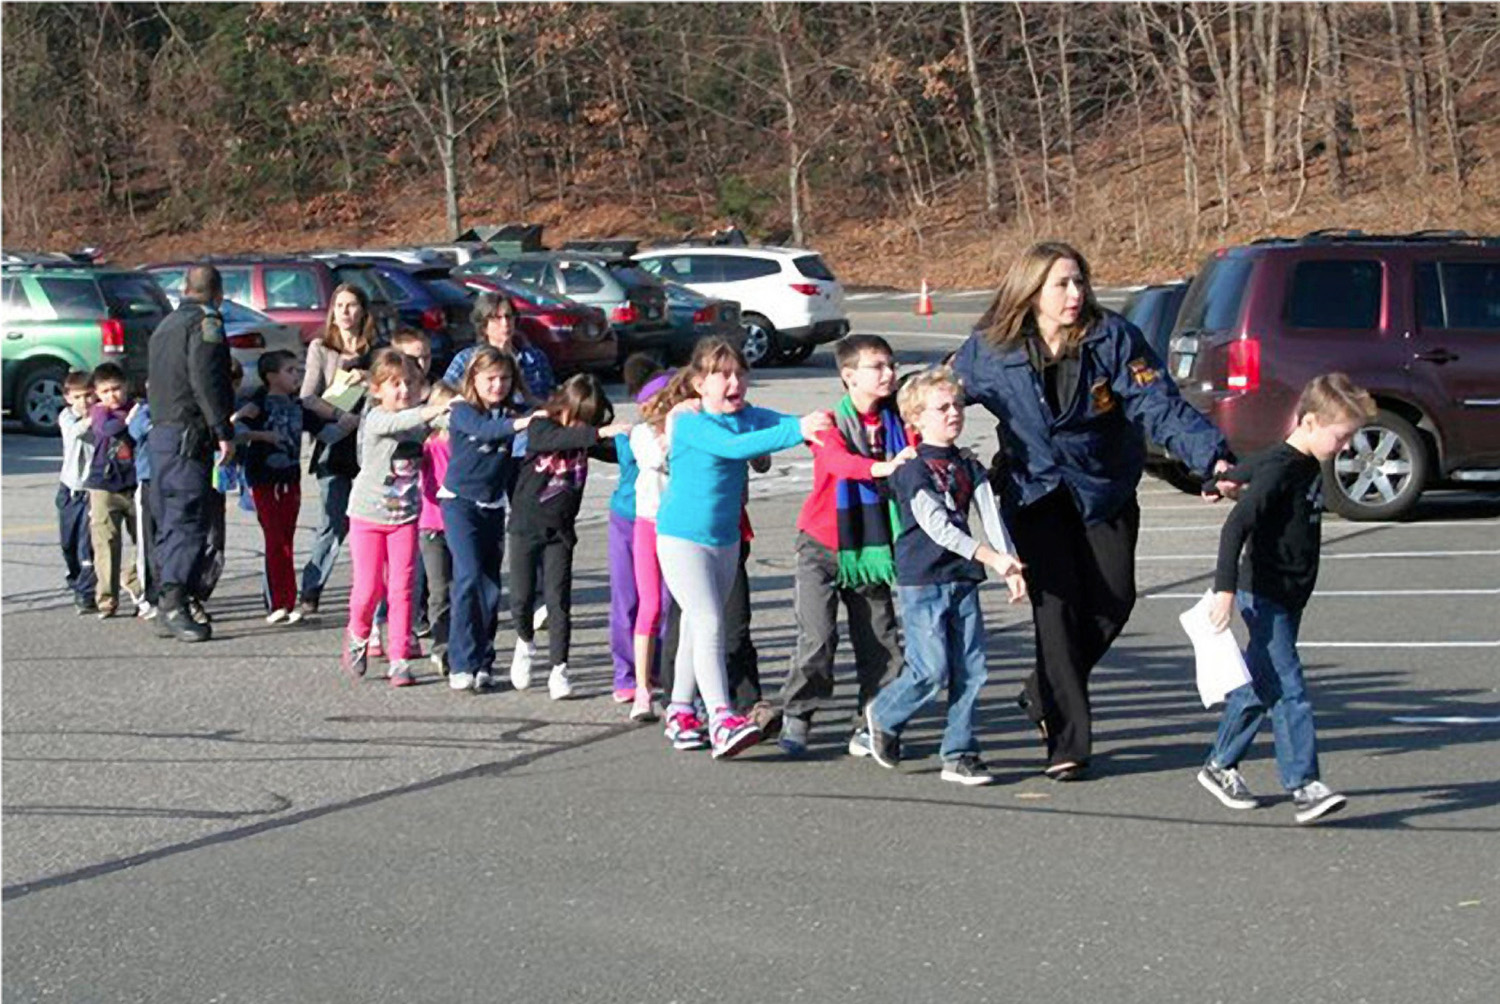 HO  421726.JPG HO  1C257A51 HO  1C223C14 Dec 14, 2012 - Newtown, Connecticut, U.S. - State police personnel lead children from the Sandy Hook Elementary School in this handout picture from the Newtown Bee, in Newtown, Connecticut, December 14, 2012. All public schools in Newtown, Connecticut, were placed in lockdown on Friday following a shooting at Sandy Hook Elementary School. An official with knowledge of a shooting at a Connecticut elementary school says 27 people are dead, including 18 children. The official spoke on condition of anonymity because the investigation is still under way. (Credit Image: © Shannon Hicks/Newtown Bee/ZUMA24.com)